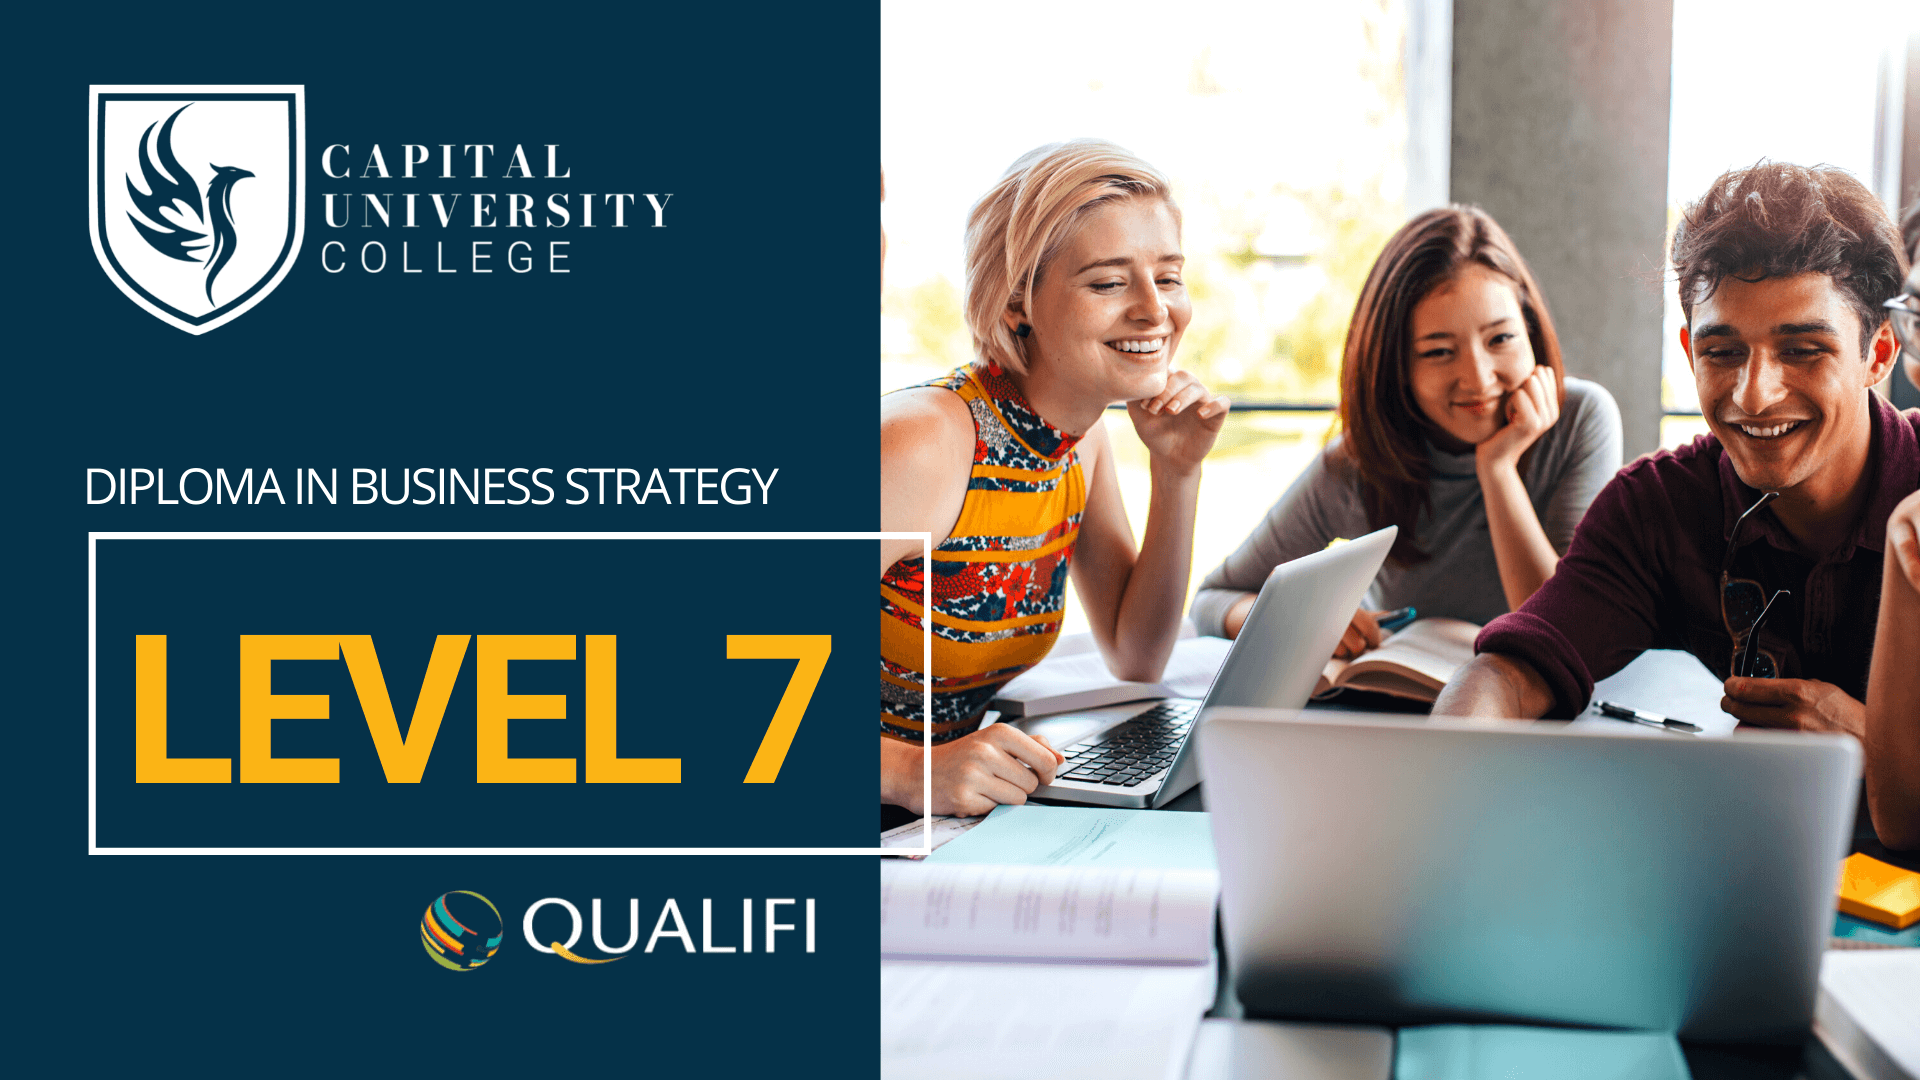 Level 7 Diploma in Business Strategy (PreMBA) capital university college